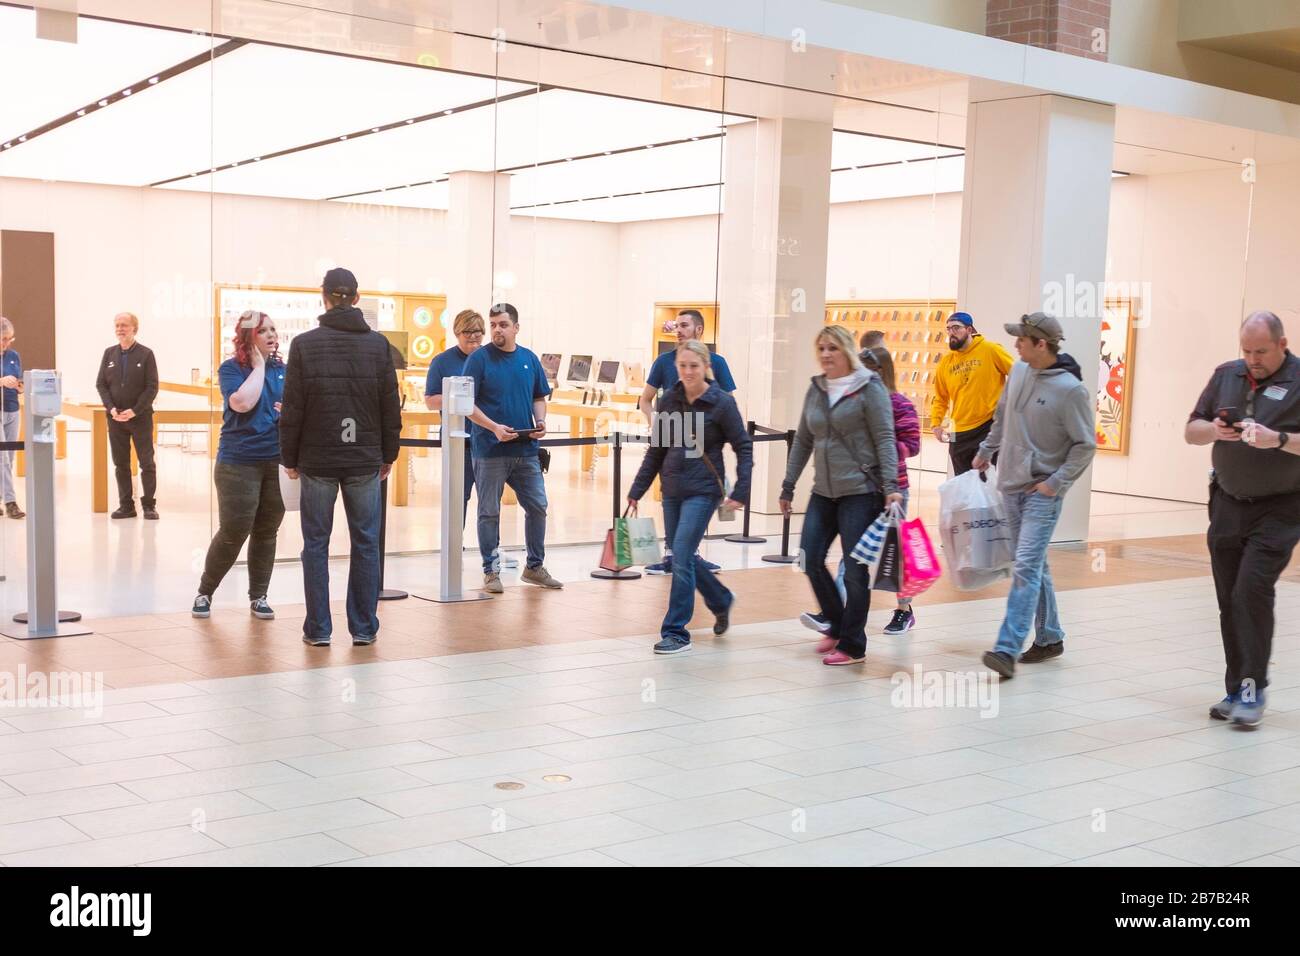 Apple Store Employees High Resolution Stock Photography and Images - Alamy